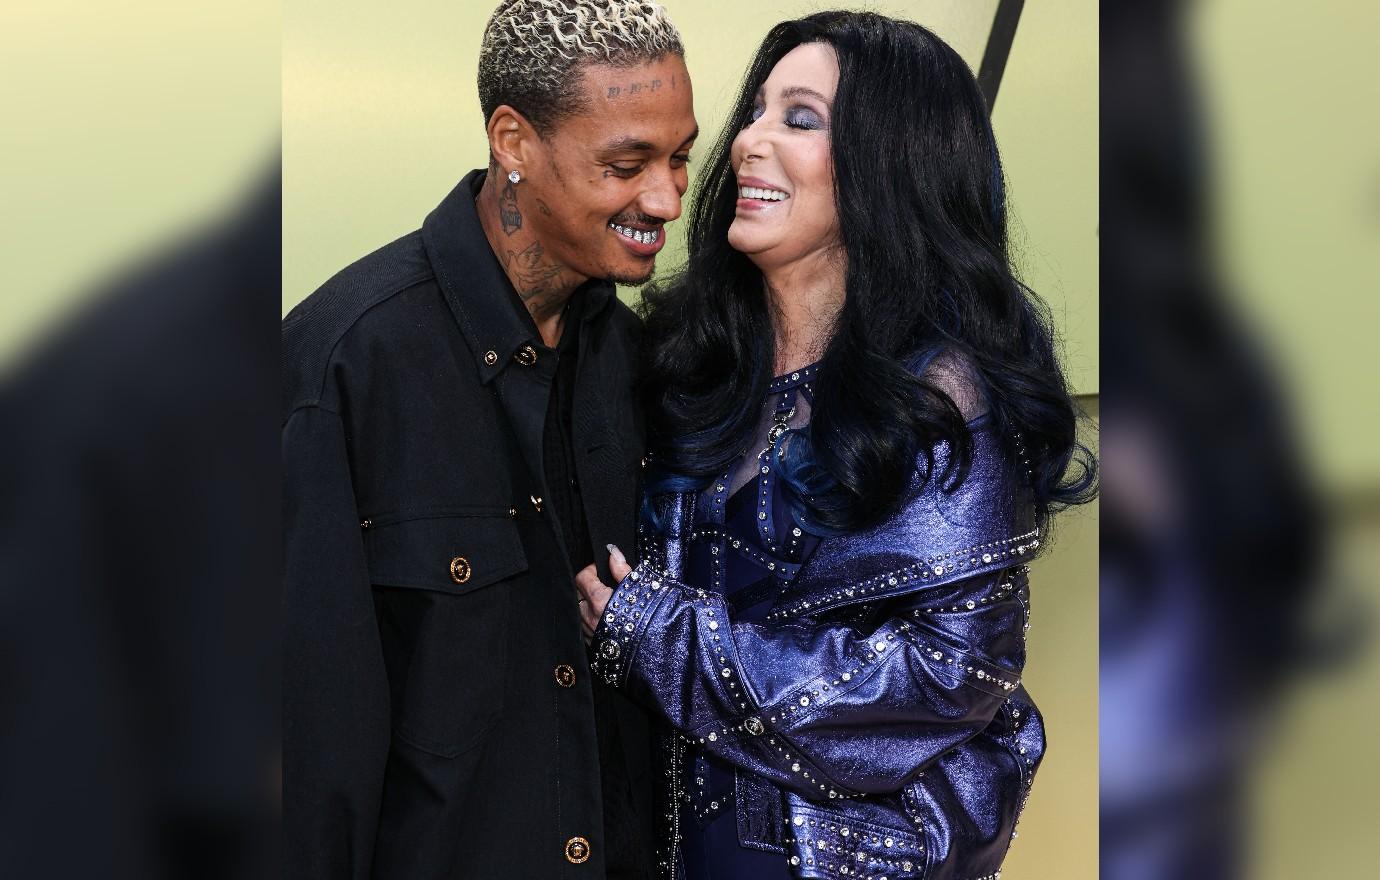 Cher Flashes Diamond Ring Despite Disapproval From Sons image pic